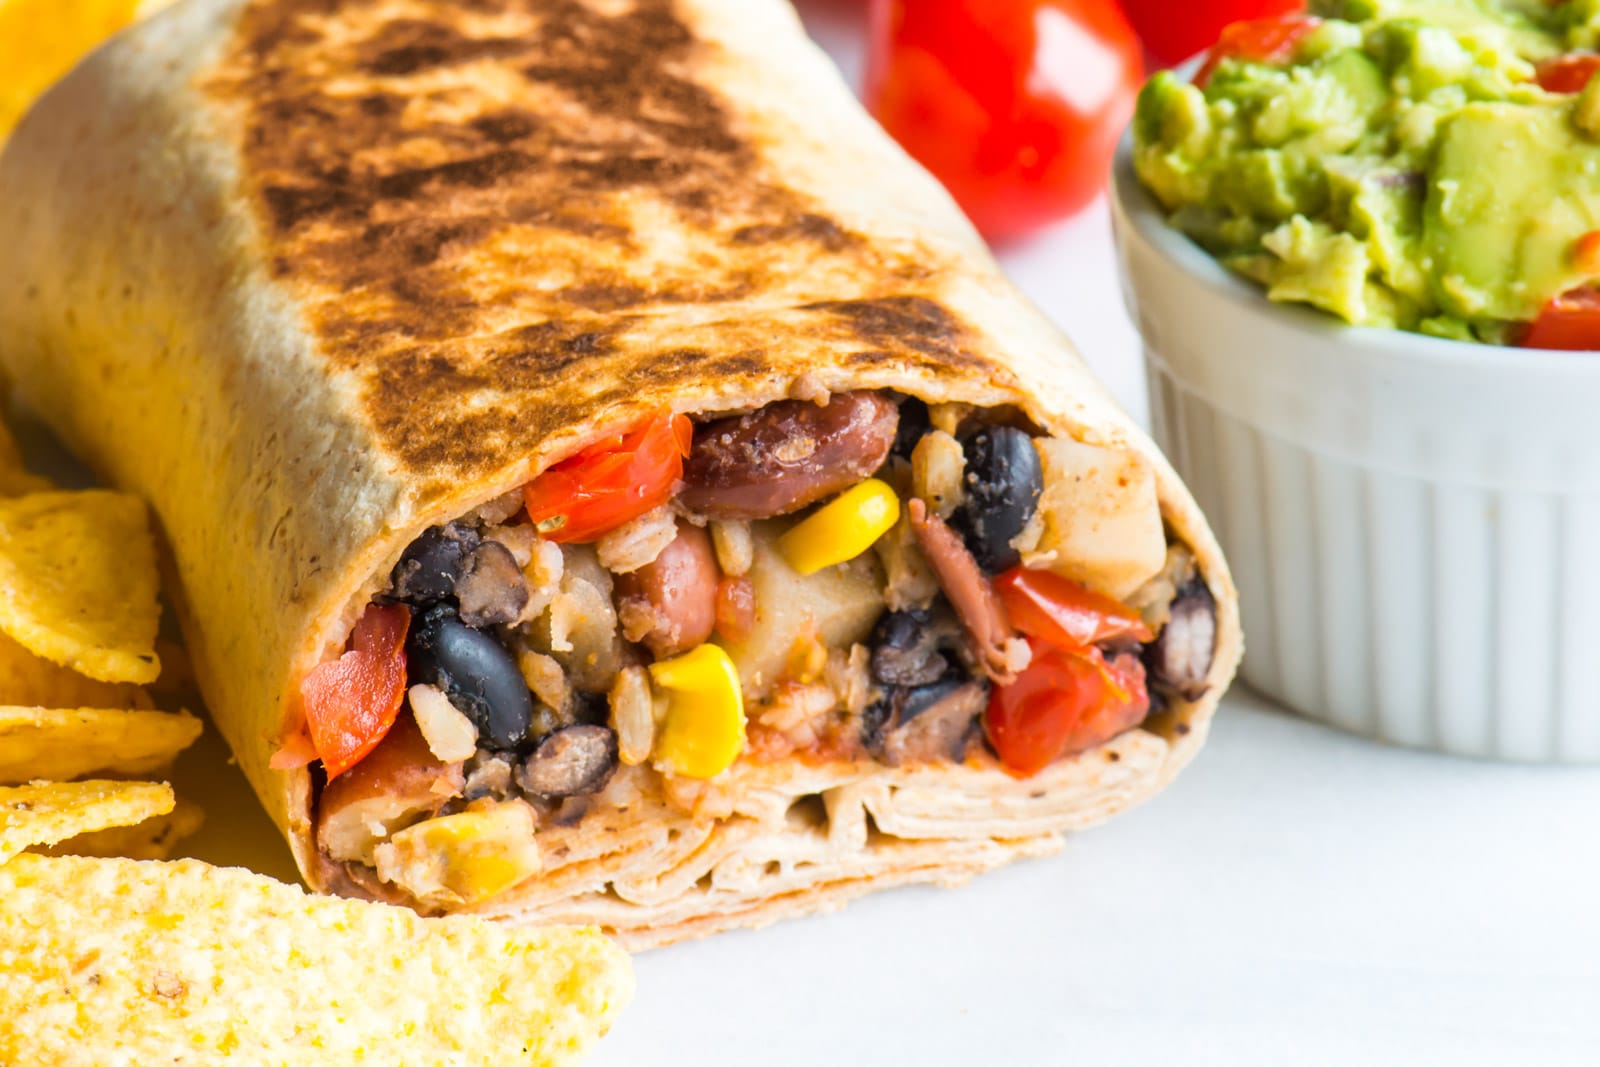 A vegan black bean burrito is cut in half to reveal beans and rice. It sits next to guacamole, fresh cherry tomatoes, and tortilla chips.